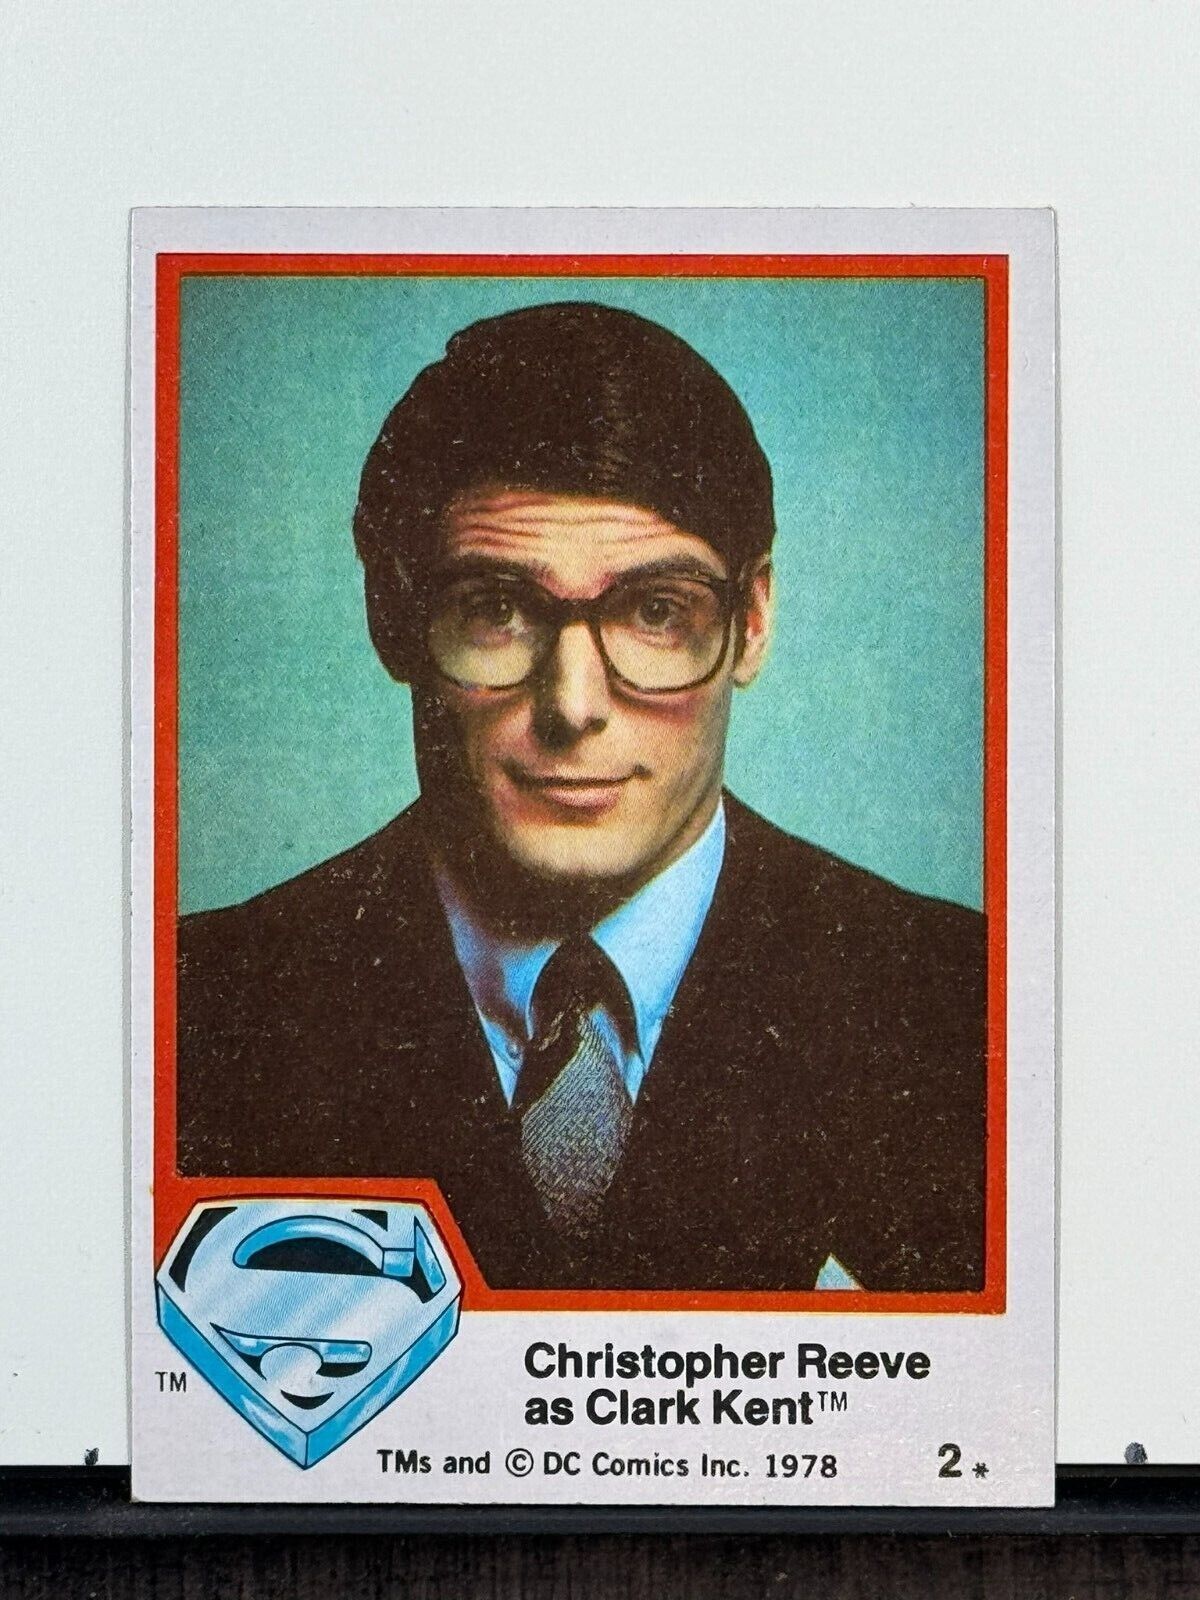 1978 Topps : Superman: The Movie Photo Cards, Series 1 - Select Your Card